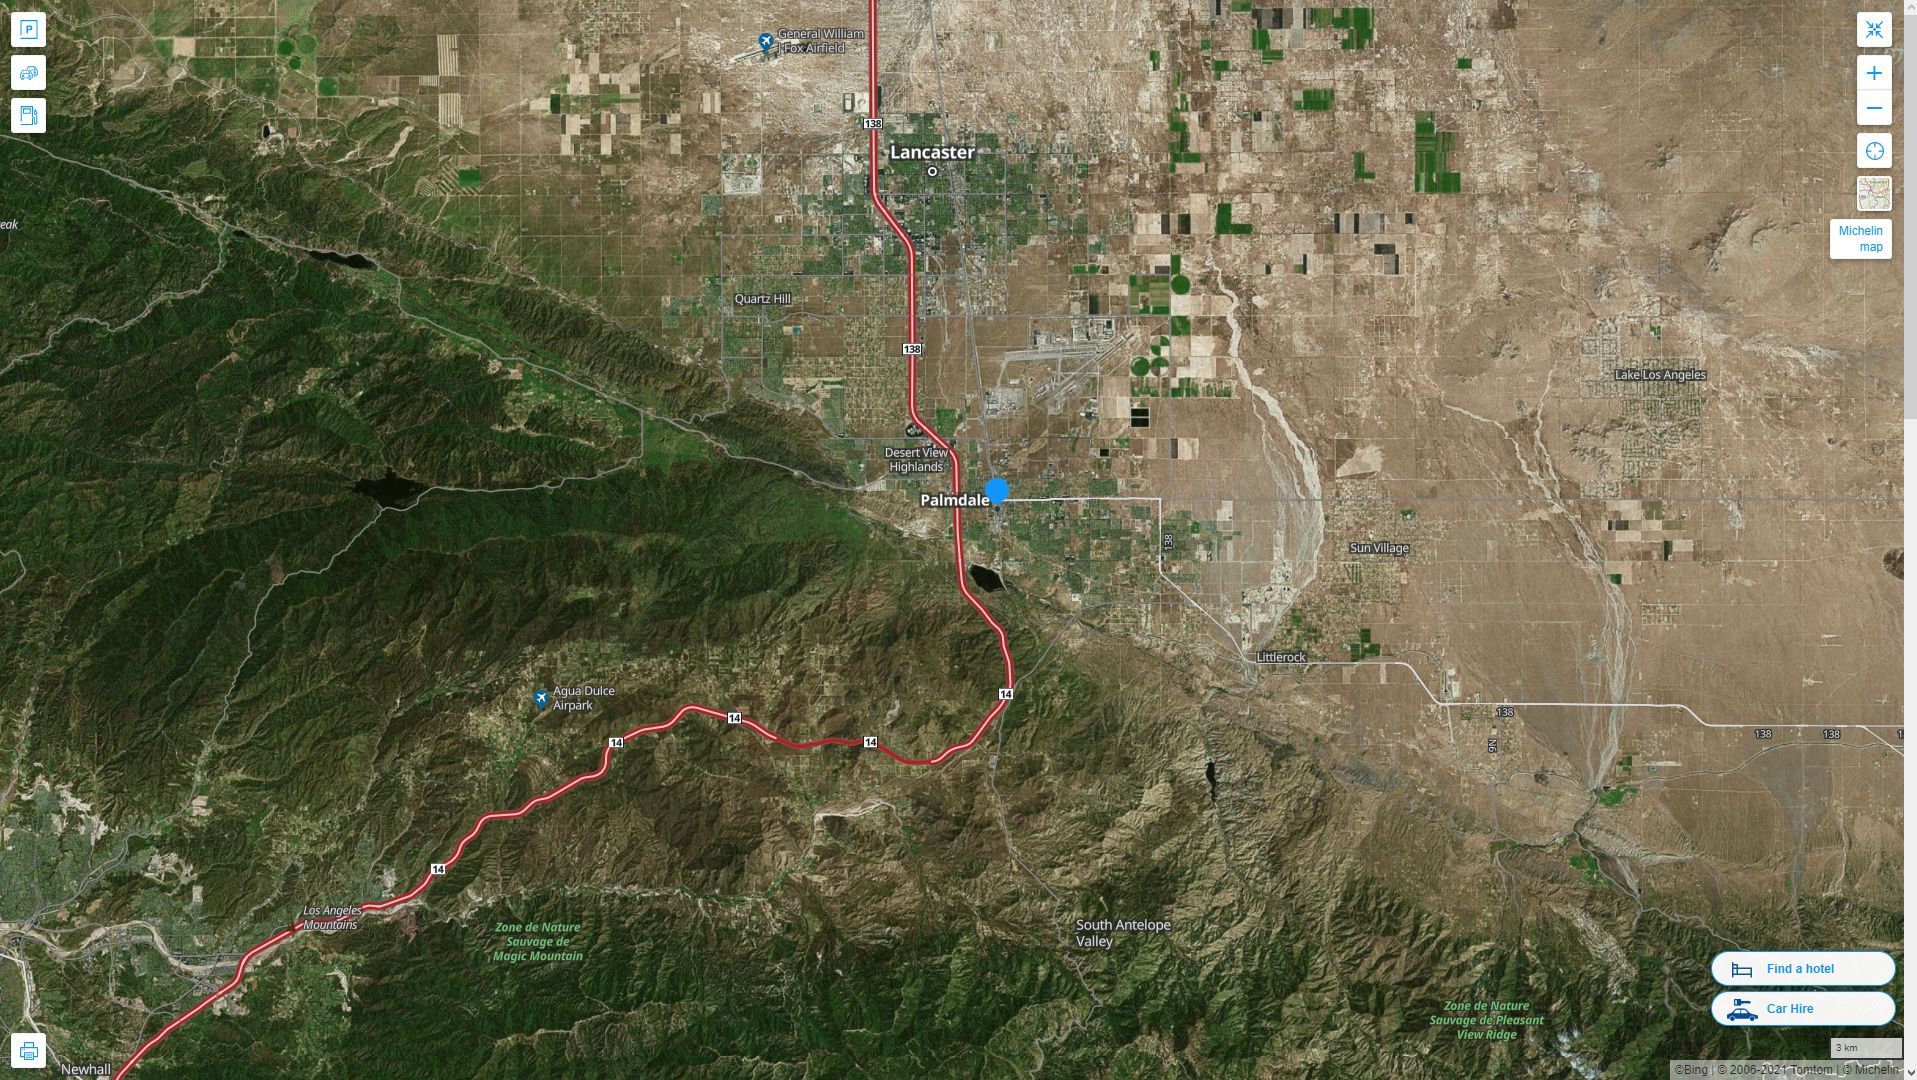 Palmdale California Highway and Road Map with Satellite View